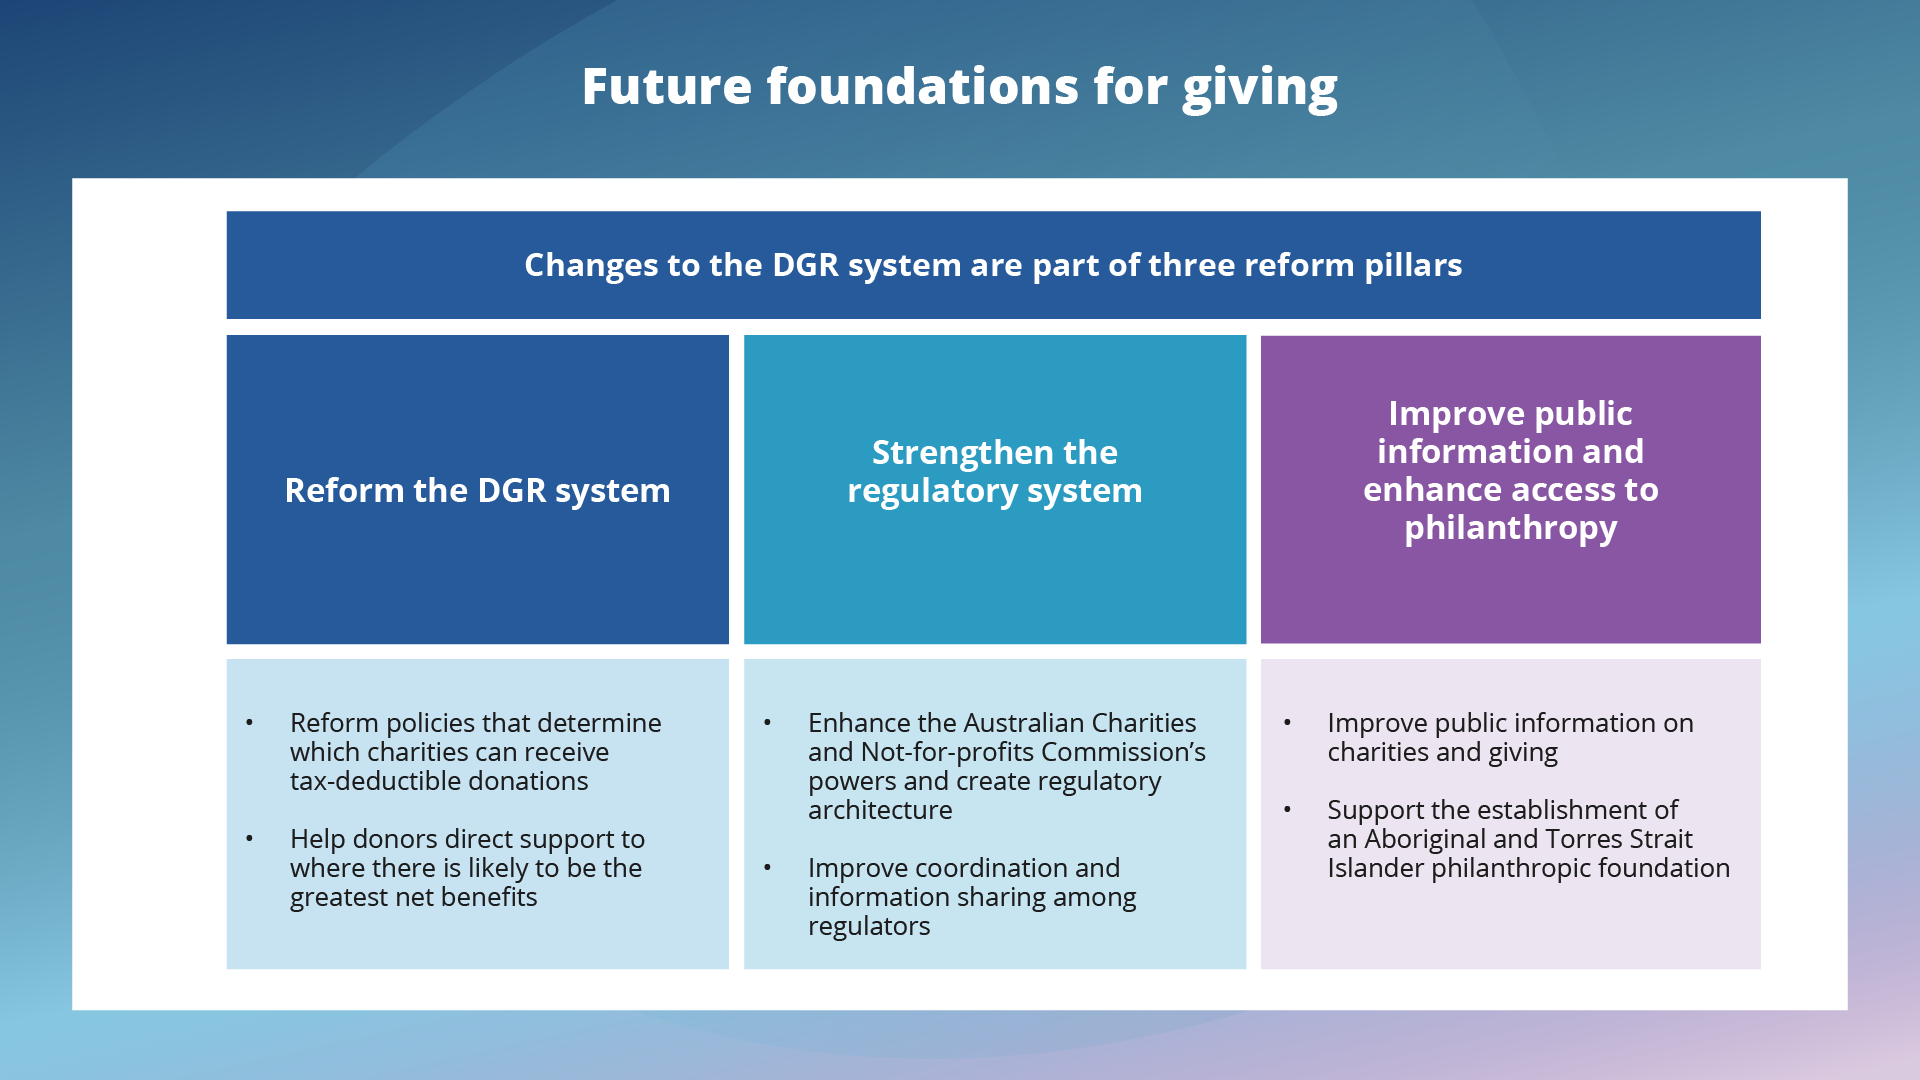 Changes to the DGR system are part of three reform pillars. Reform the DGR system.
Reform policies that determine which charities can receive tax-deductible donations. Help donors direct support to where there is likely to be the greatest net benefits. Strengthen the regulatory system. Enhance the Australian Charities and Not-for-profits Commission’s powers and create regulatory architecture. Improve coordination and information sharing among regulators. Improve public information and enhance access. Improve public information on charities and giving. Support the establishment of an Aboriginal and Torres Strait Islander philanthropic foundation.